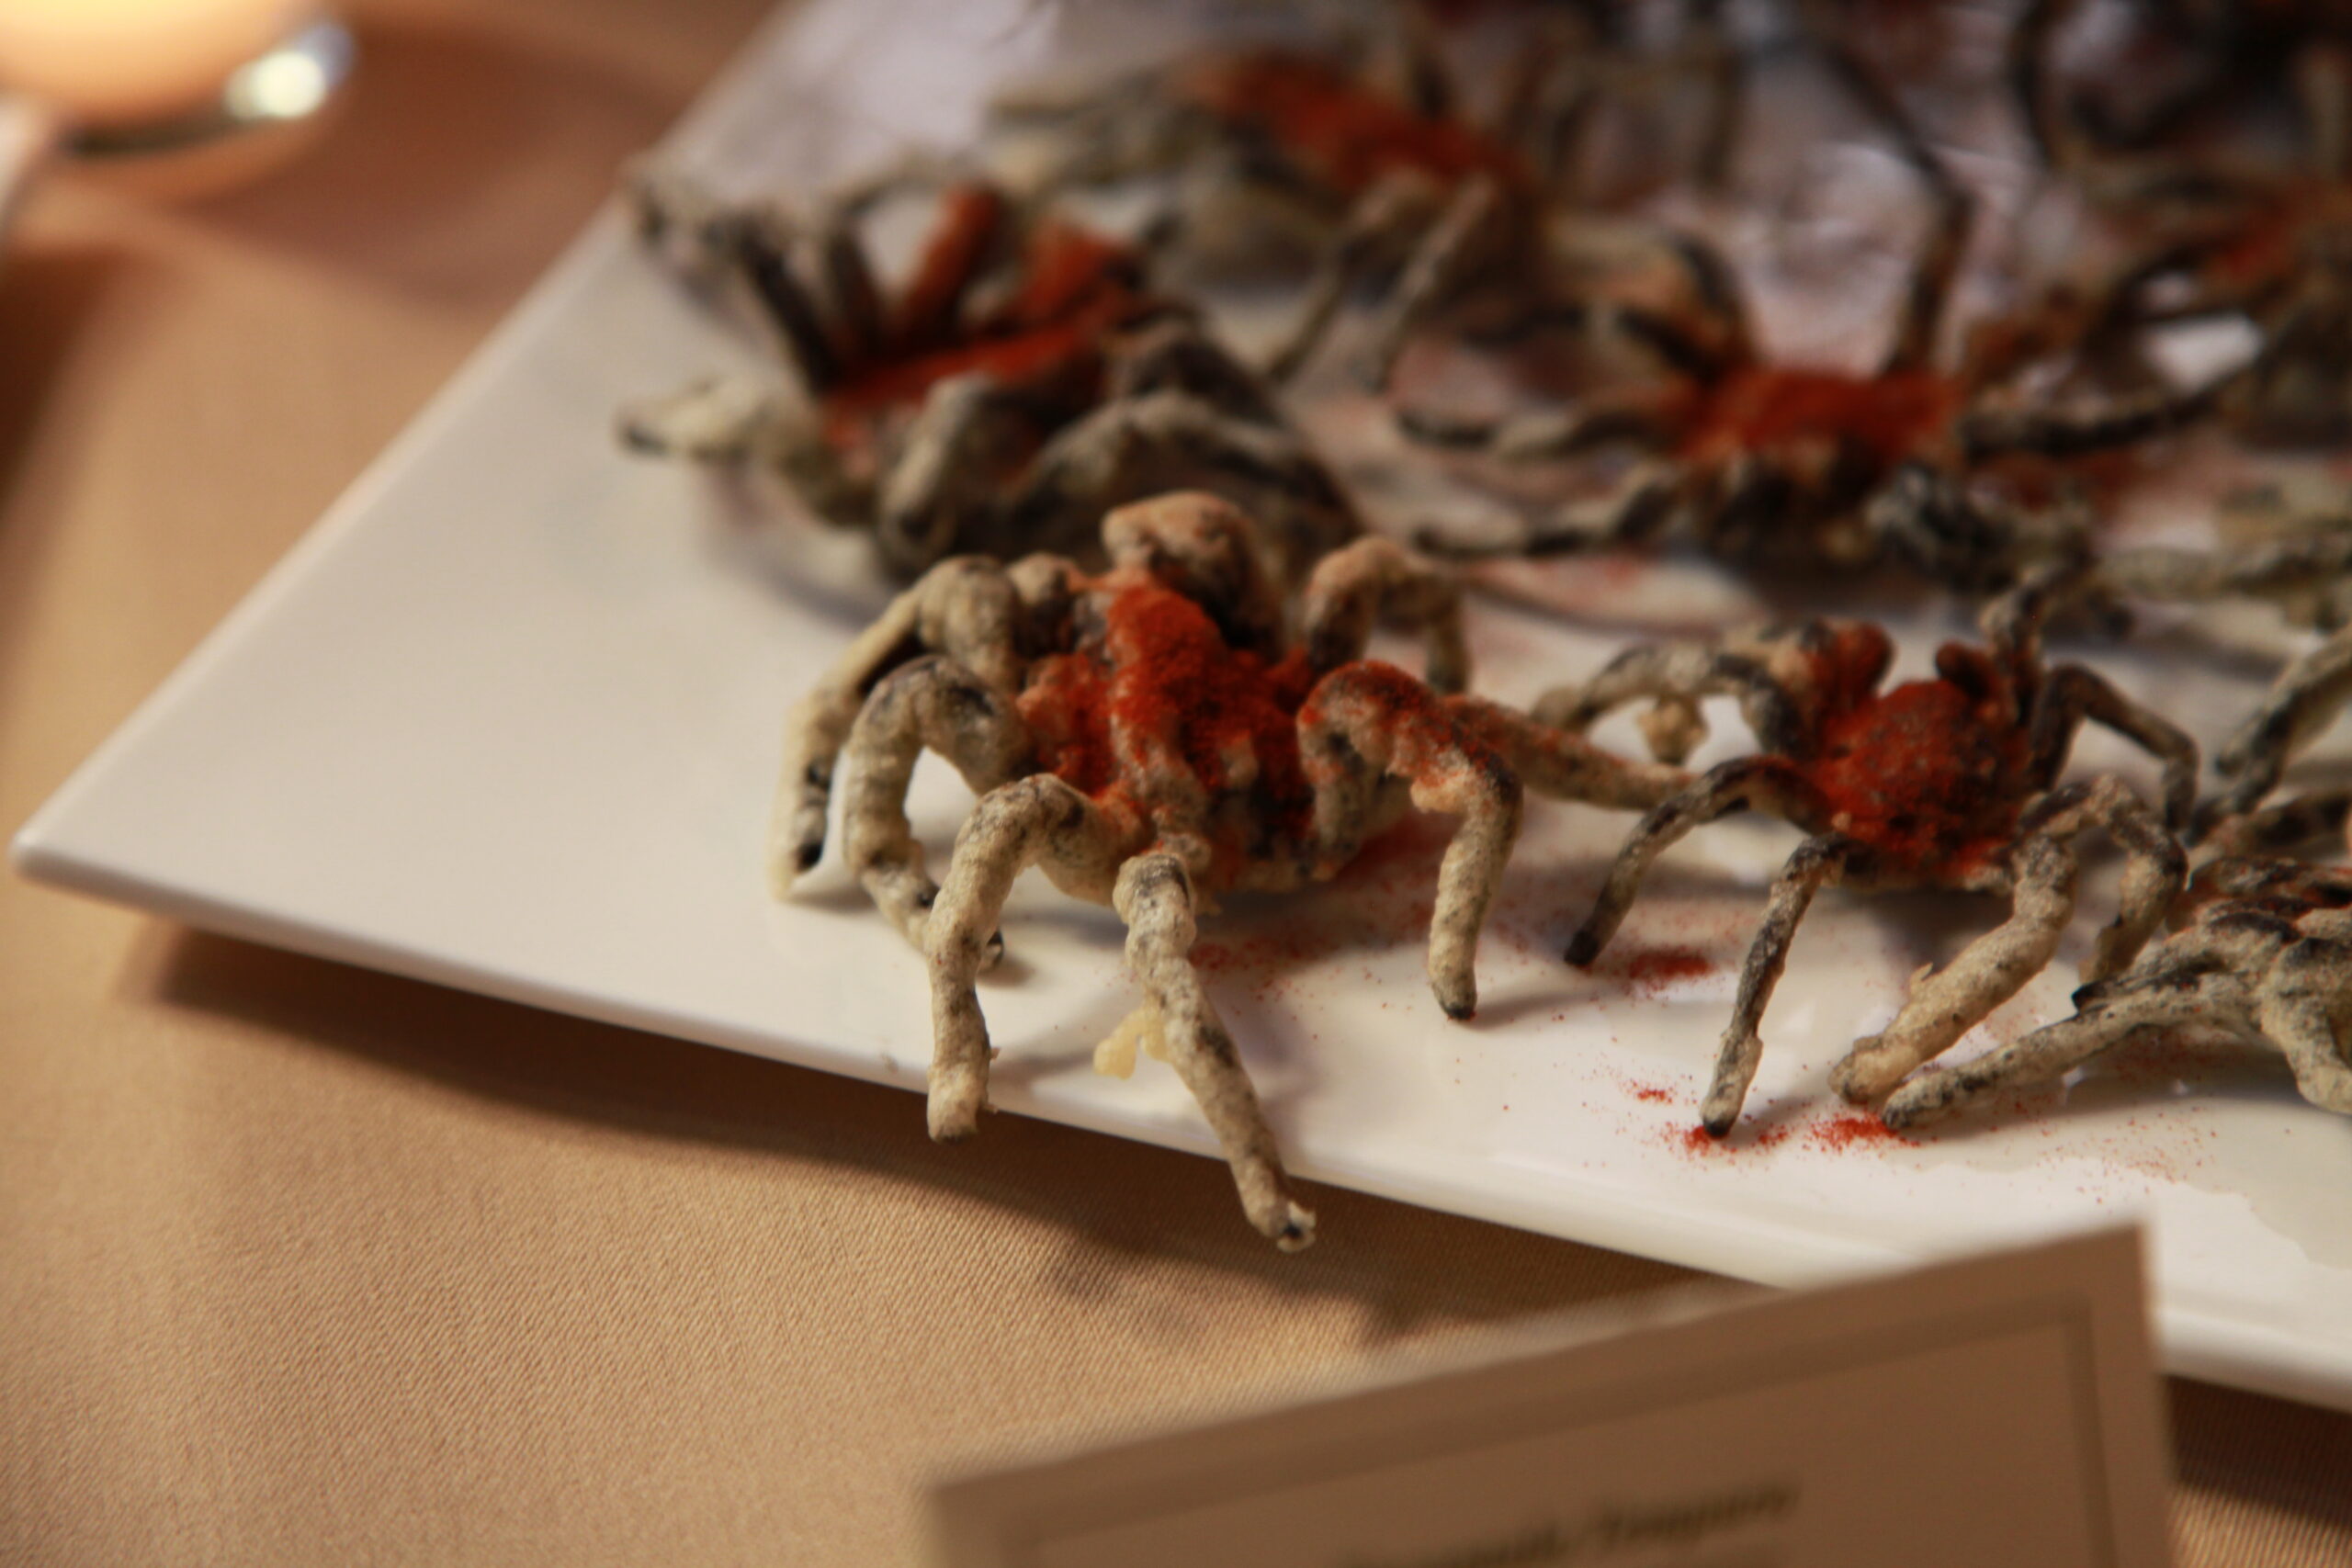 I Chomped My Way Through Five Courses of Horrifying Bugs